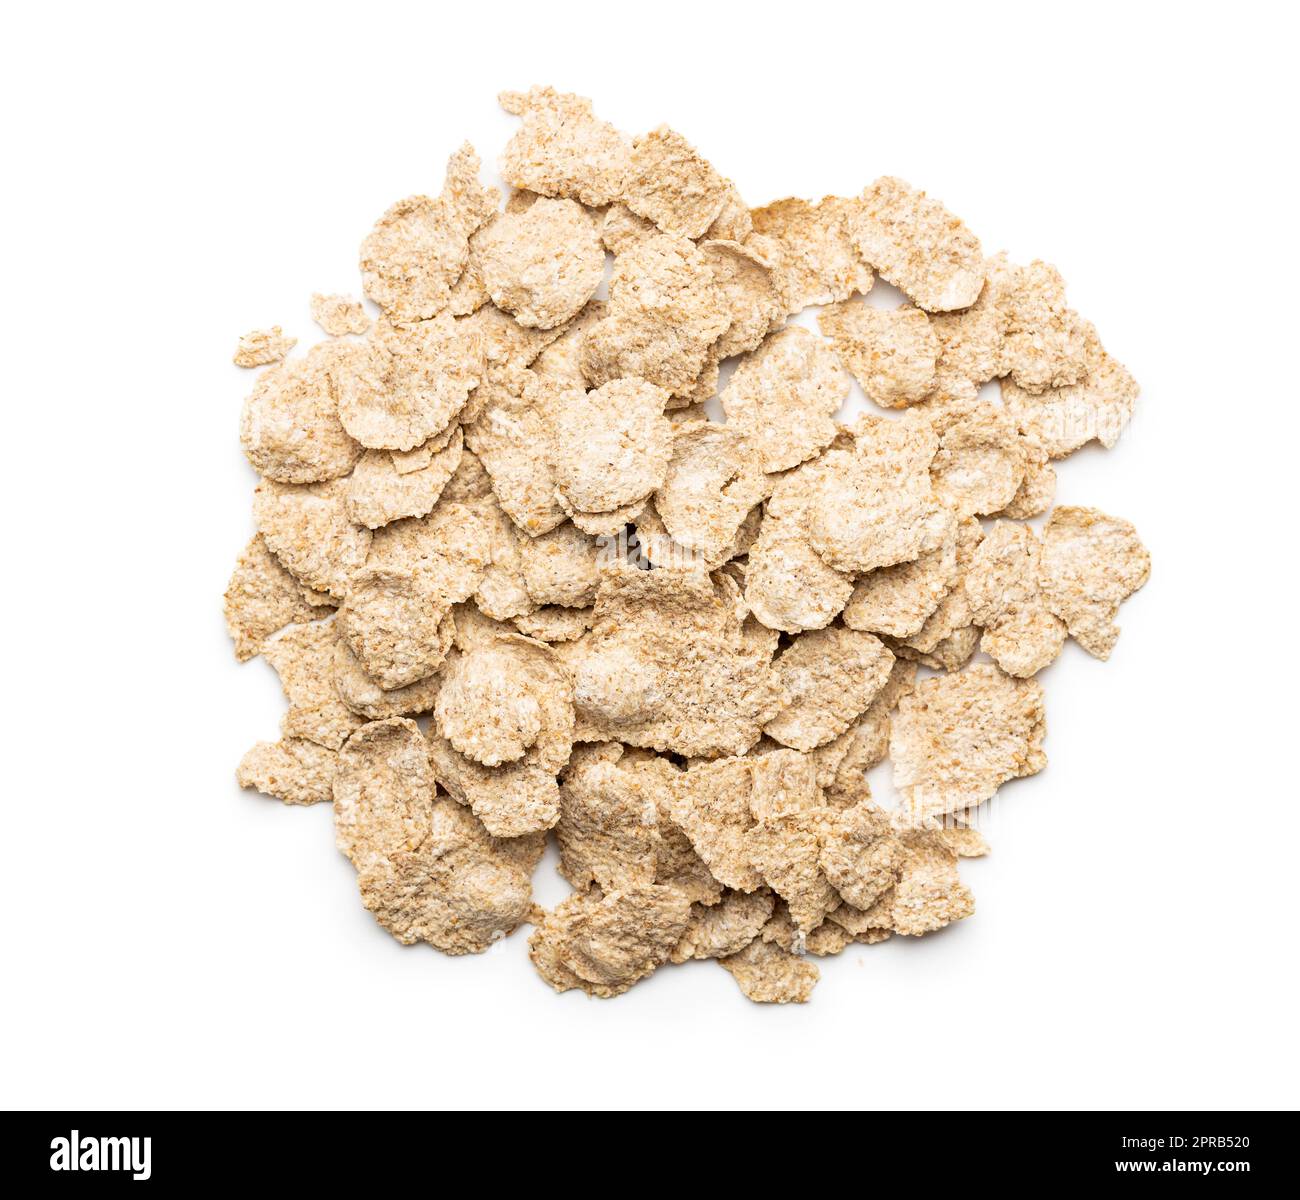 Whole grain cereal flakes. Wholegrain breakfast cereals isolated on white background. Stock Photo